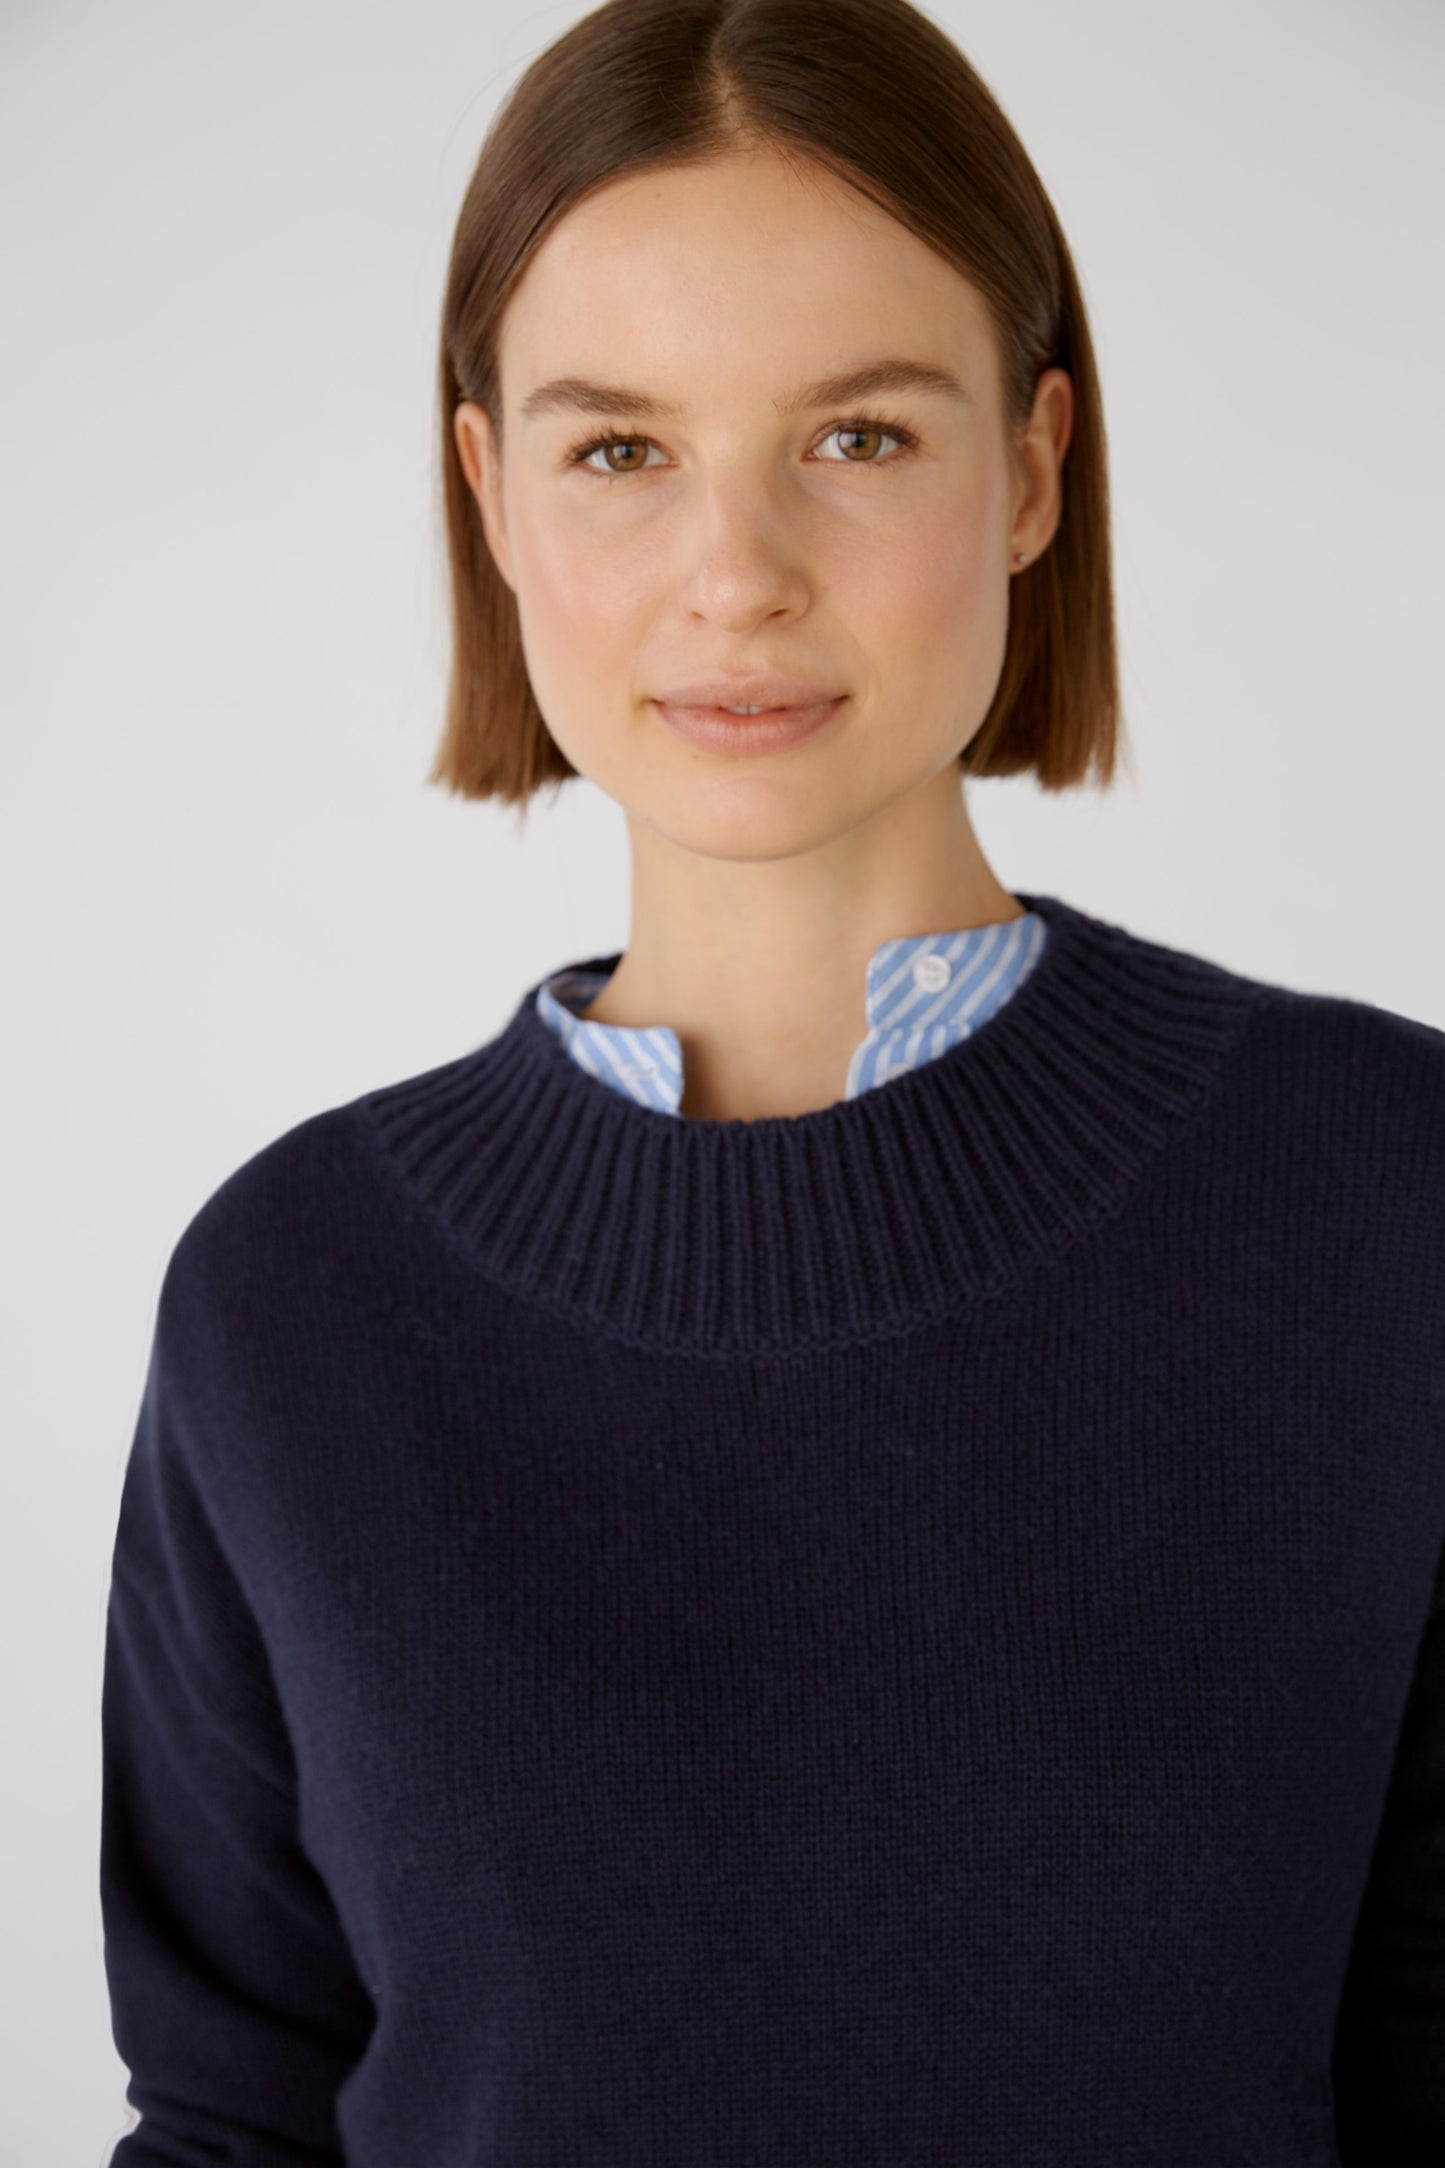 Oui Navy Cropped Sweater